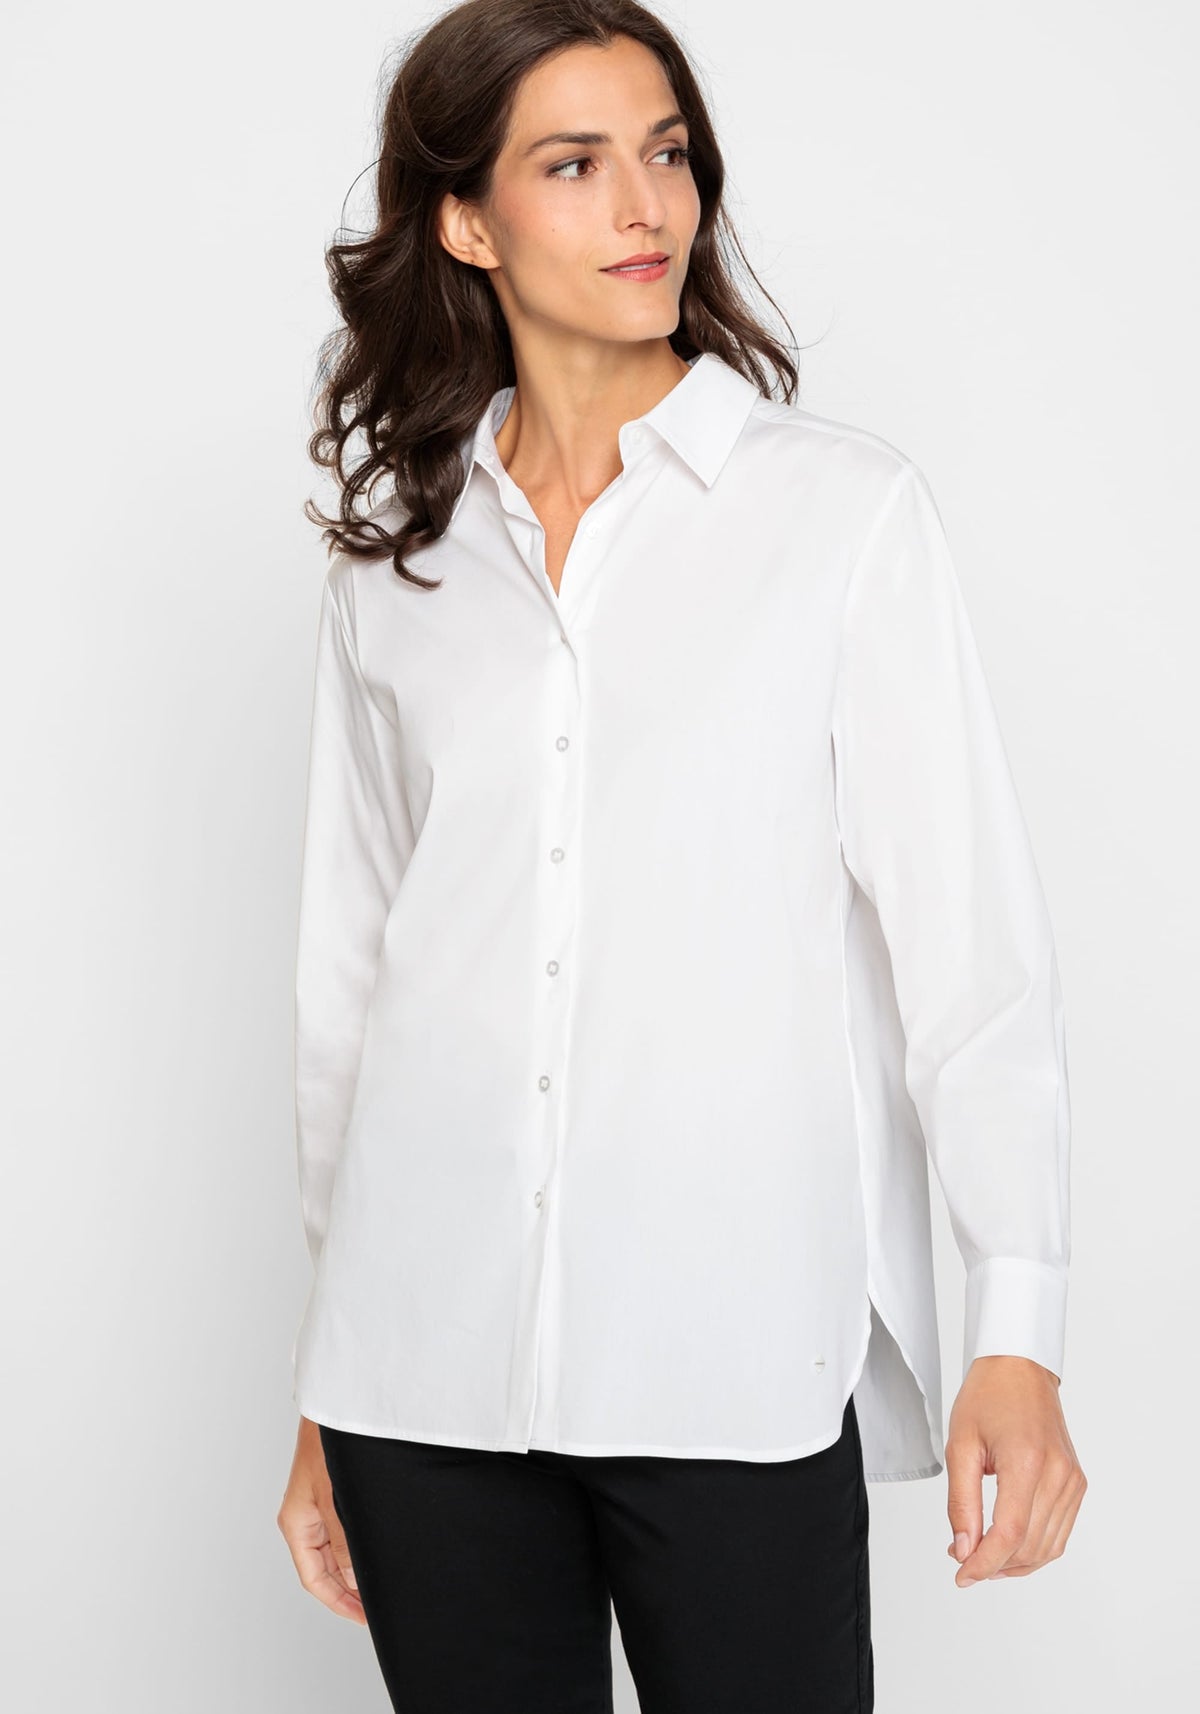 Cotton Blend Long Sleeve Classic Solid Shirt